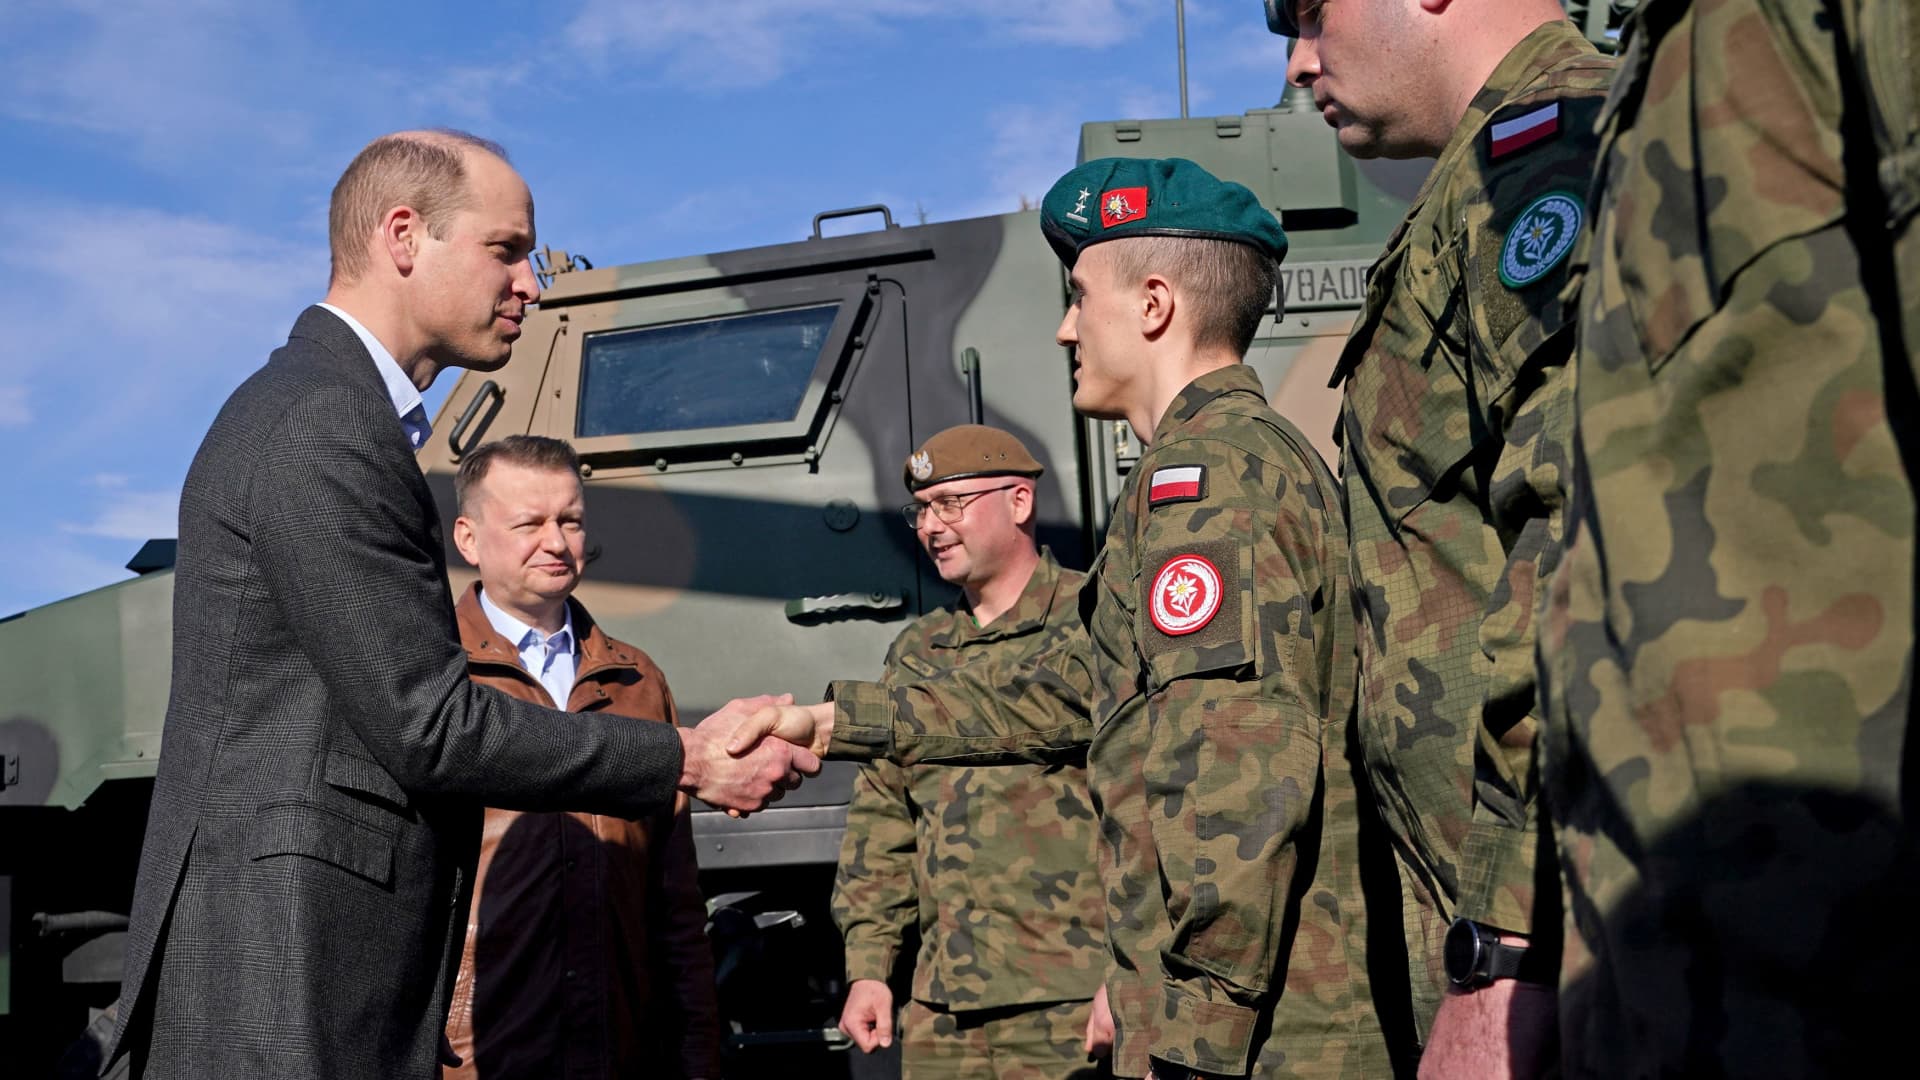 The Prince of Wales (left) meeting members of the Polish military with Polish Deputy Prime Minister and Minister of National Defence, Mariusz Blaszczak (second left) during a visit to the 3rd Brigade Territorial Defence Force base, in Rzeszow, Poland, that has been heavily involved in providing support to Ukraine. March 22, 2023. 